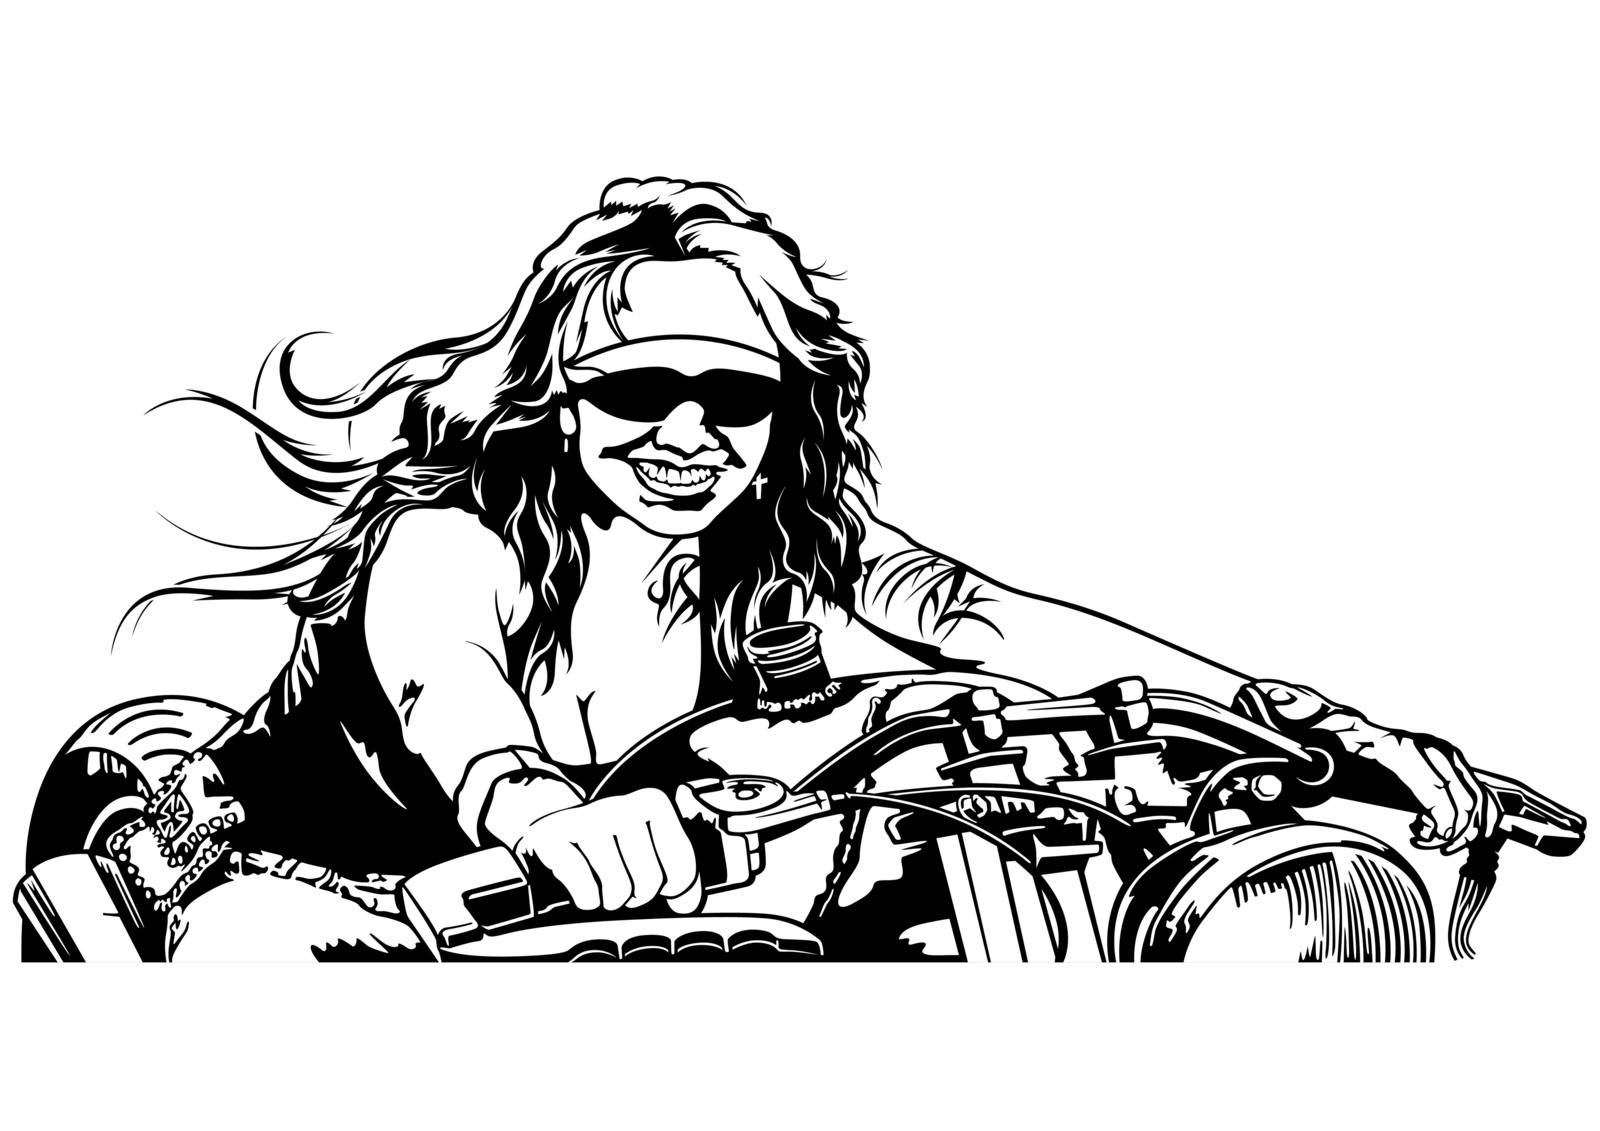 Woman Motorcyclist - Black and White Outline Illustration with Female Rider on Harley Motorcycle, Vector